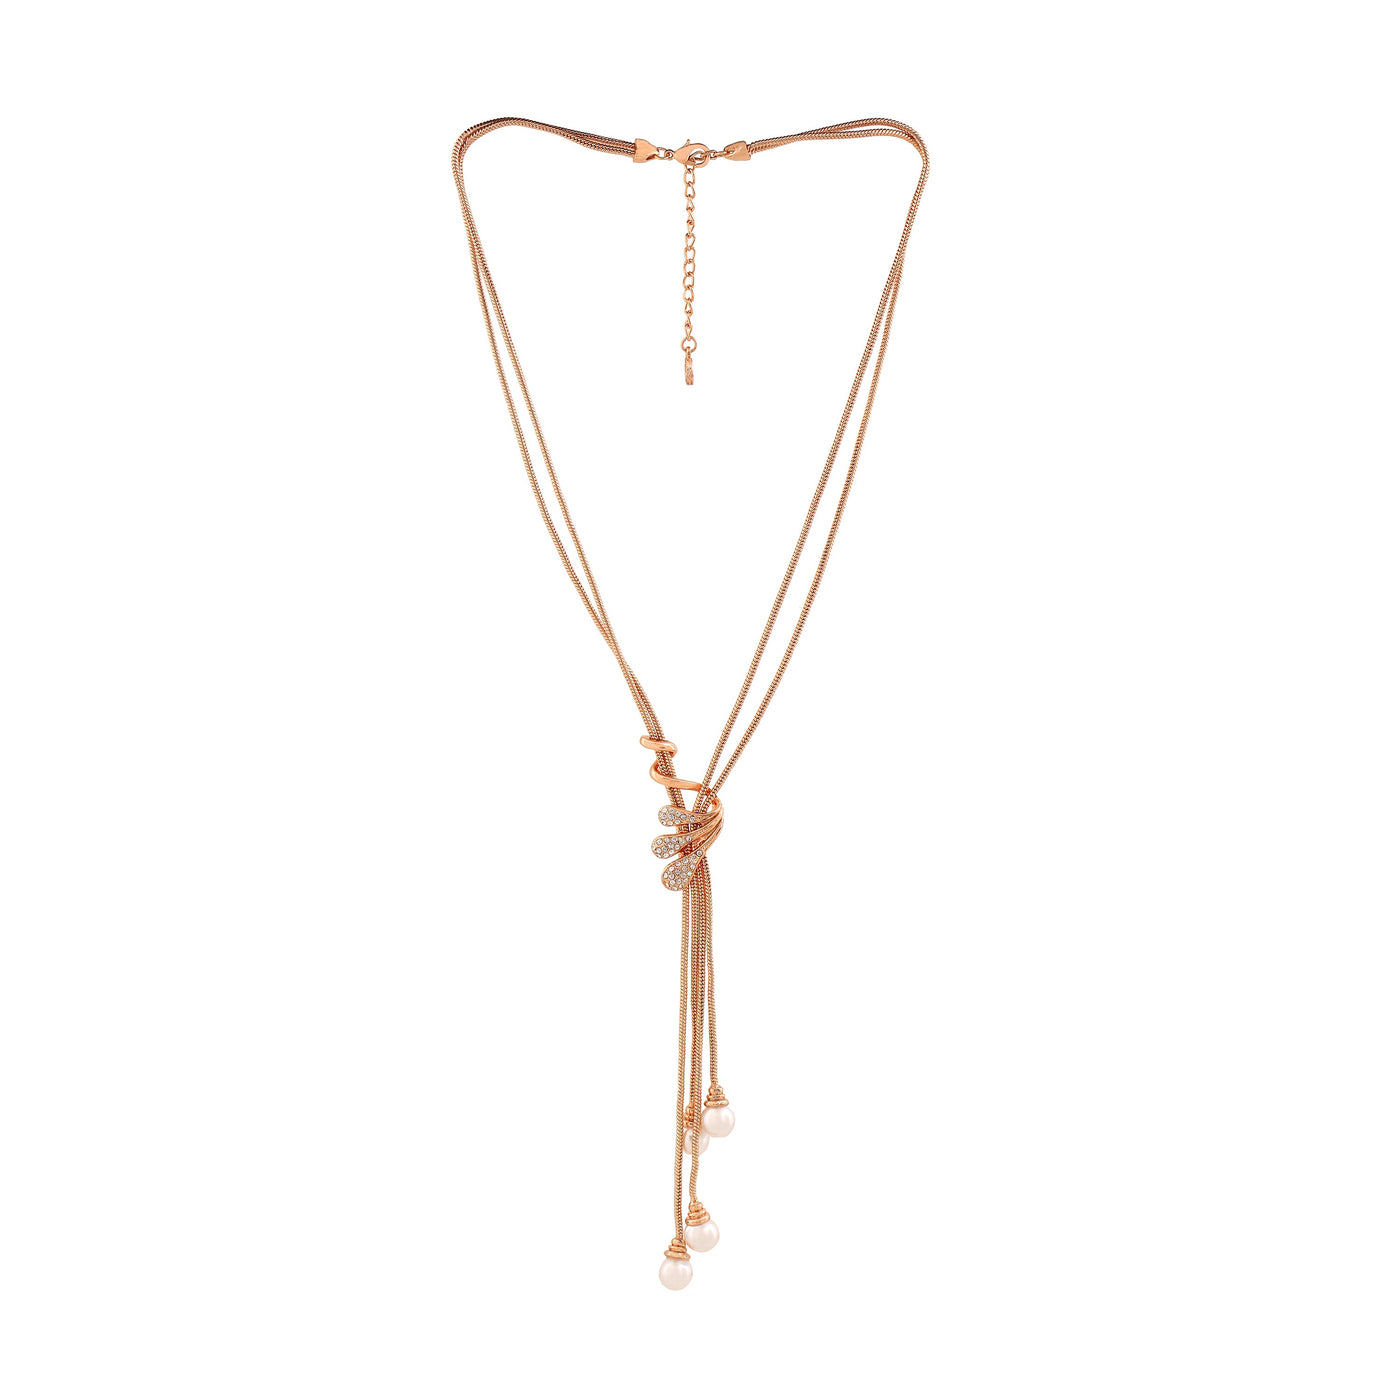 Estele Rose Gold Plated Trendy Tassel Necklace Set with Crystals & Pearls for Women